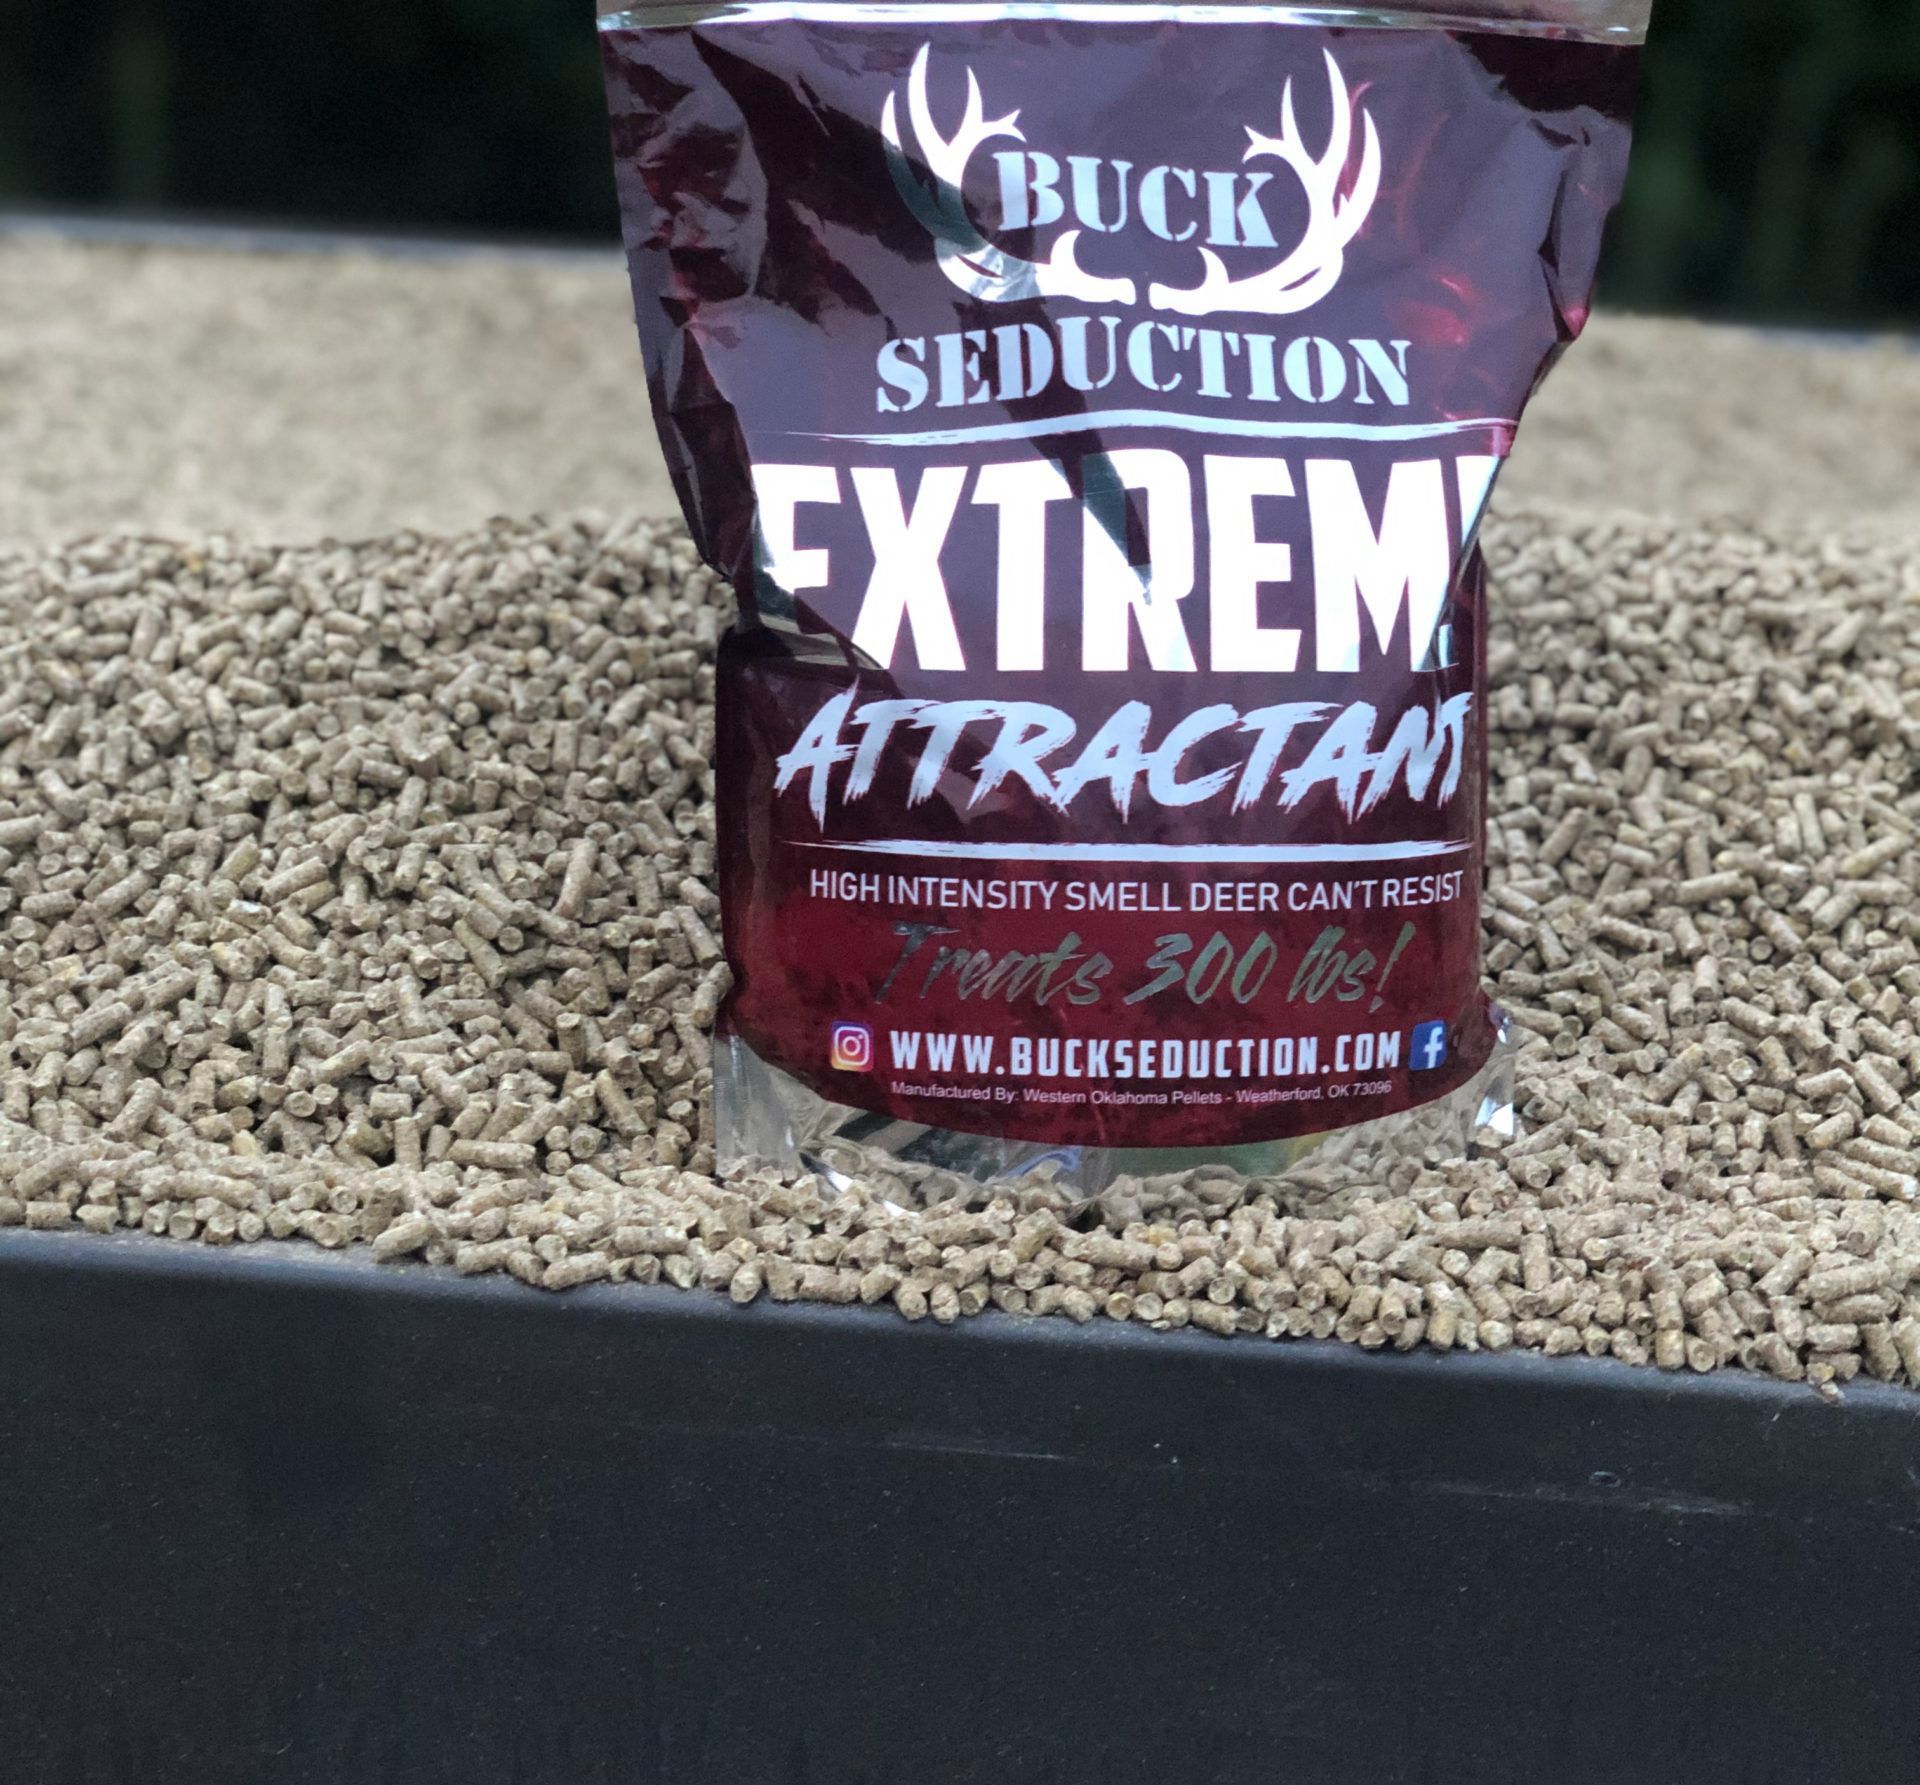 A bag of buck seduction extreme attractant sitting on top of a pile of pellets